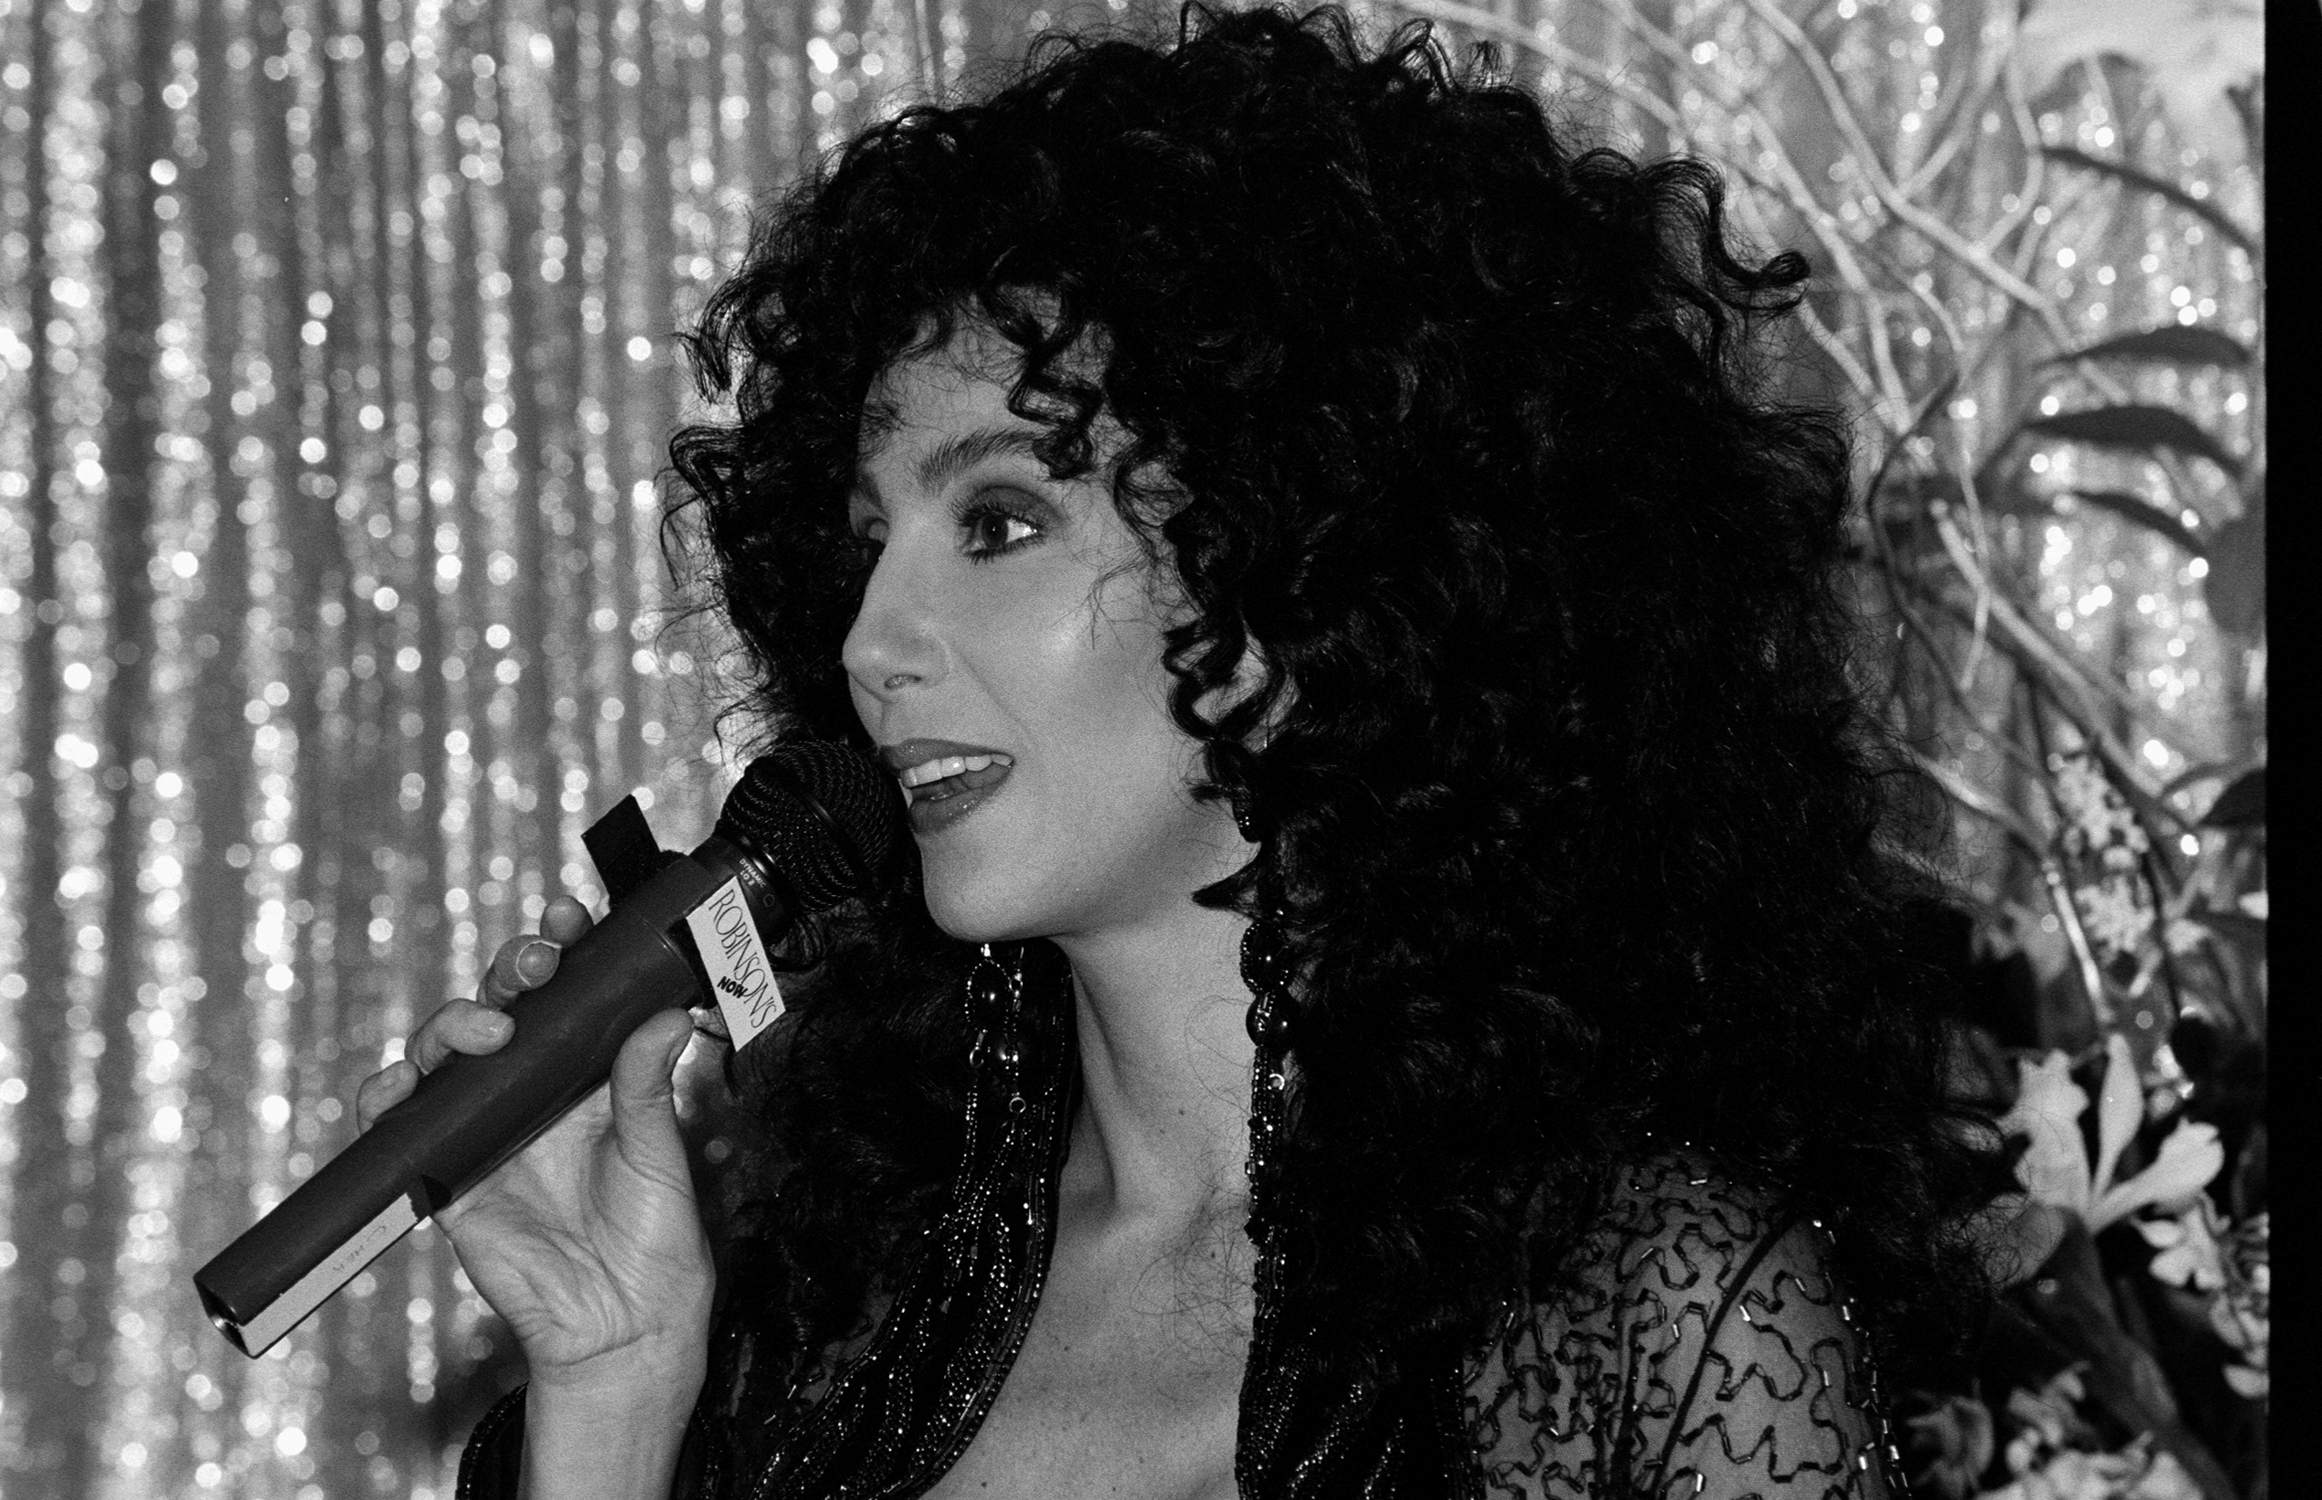 Did Cher Ever Have a No. 1 Hit Song as a Solo Artist?